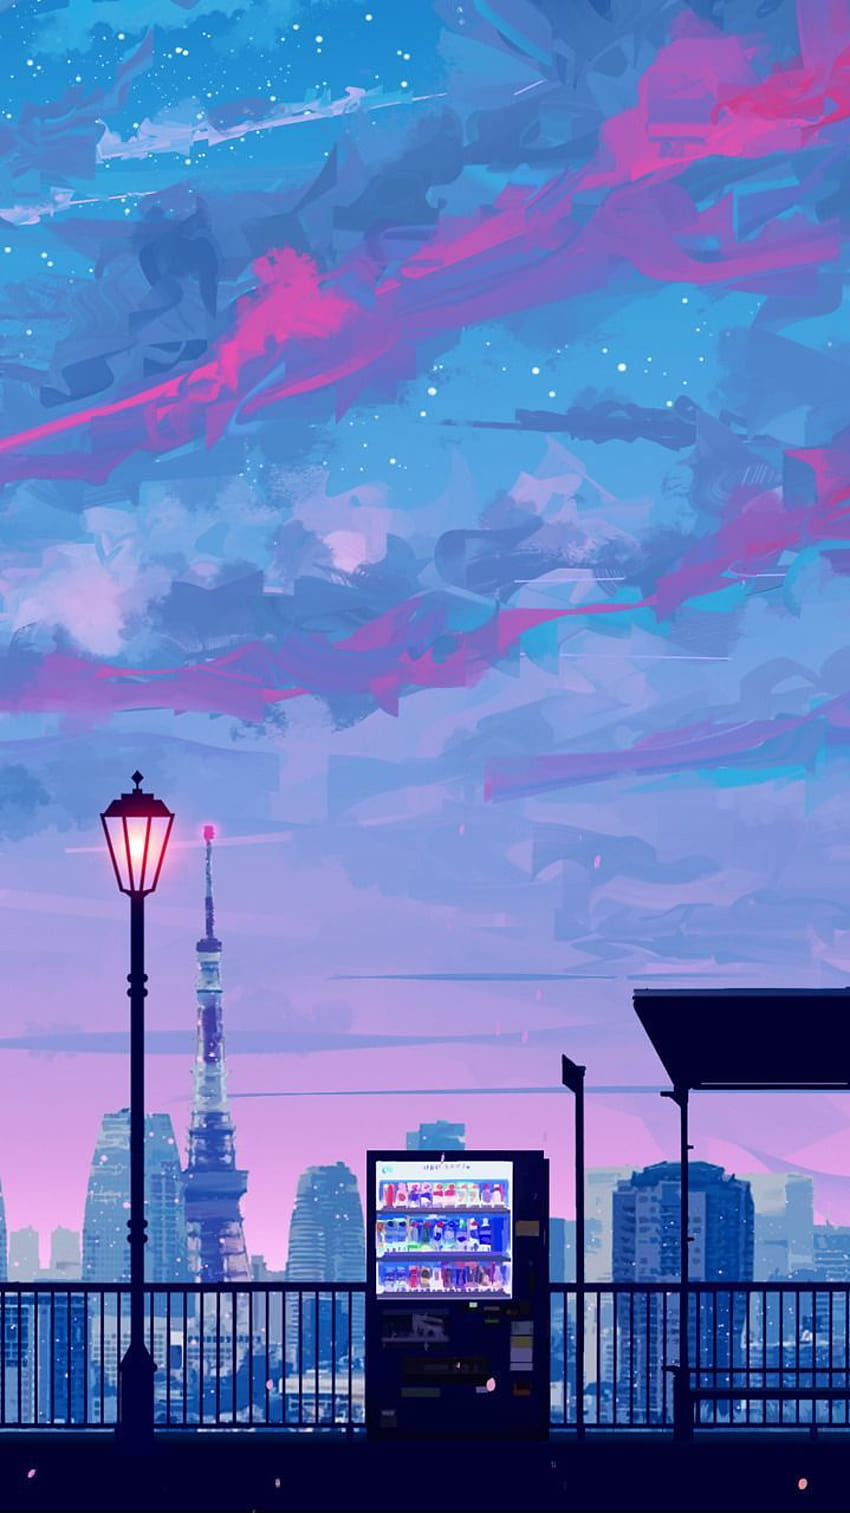 Premium AI Image | Anime scenery wallpapers for android and iphone. anime  scenery wallpapers for android and iphone. anime scenery wallpaper, anime  scenery wallpaper, anime scenery wallpaper, anime scenery wall